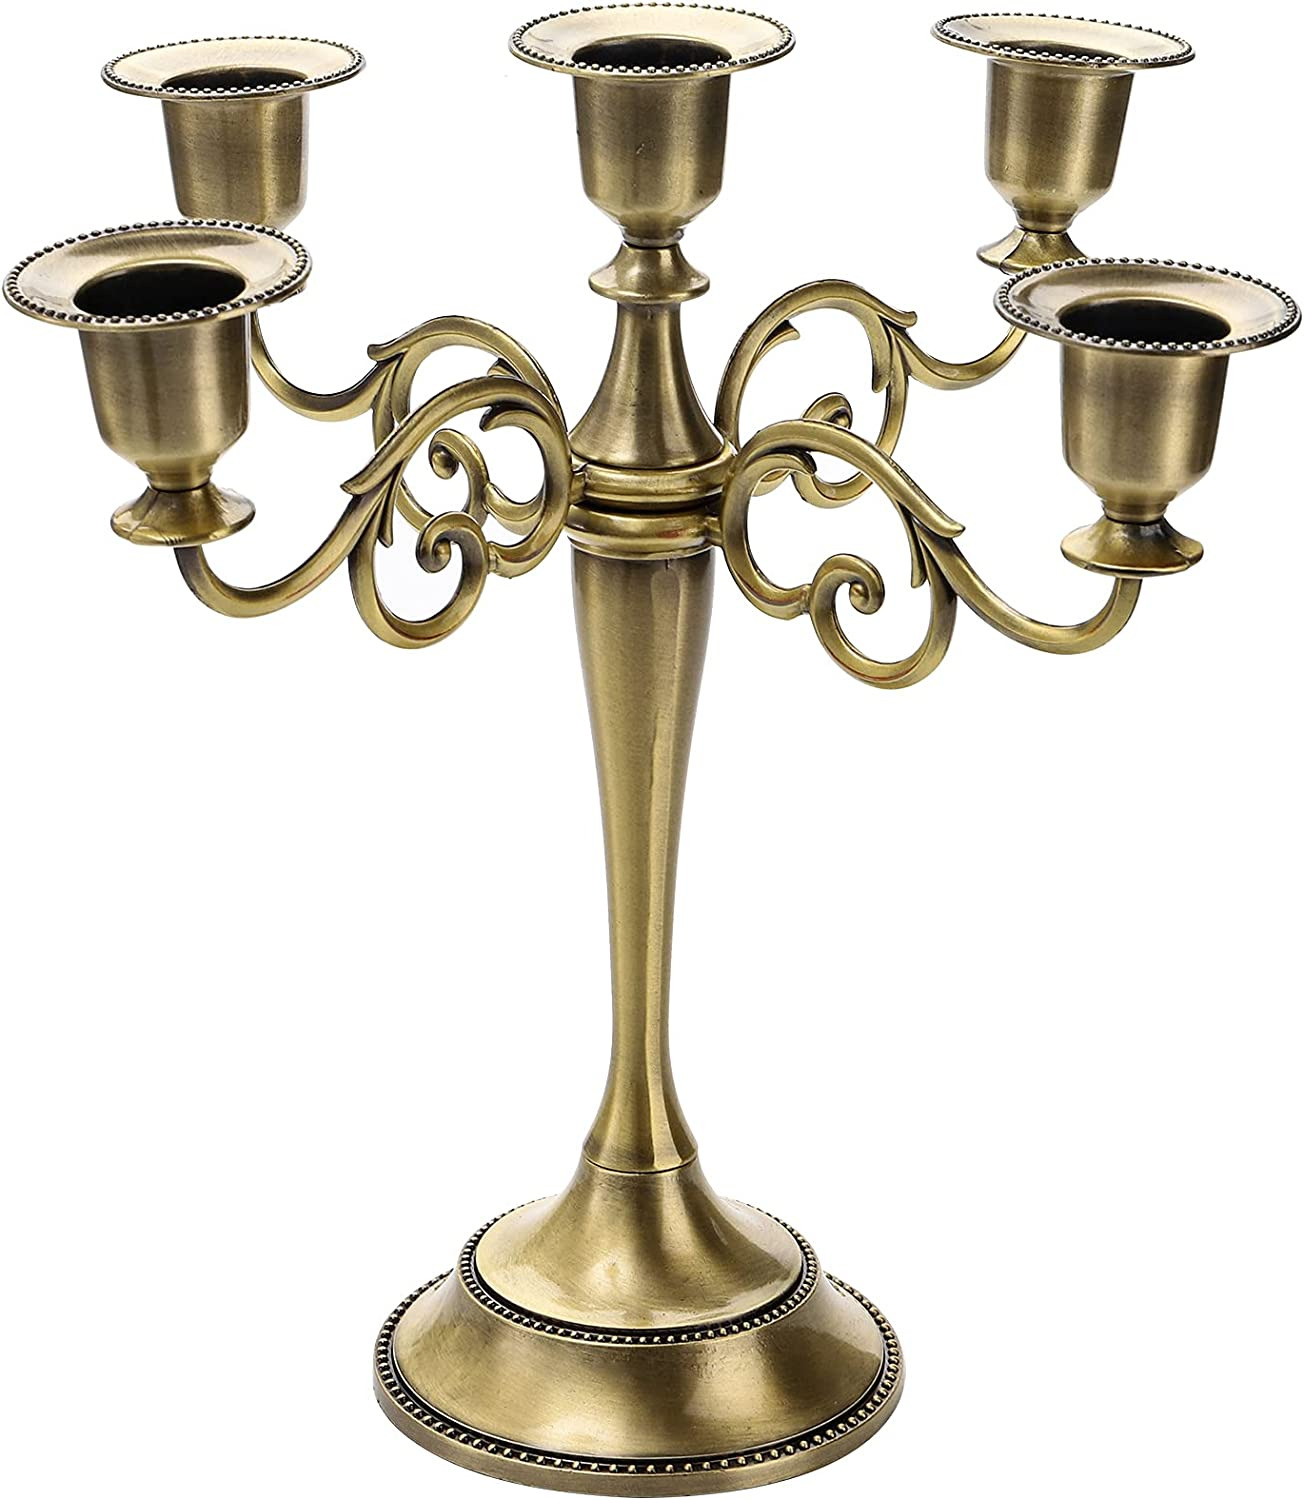 YOUEON 5 Arm Candelabra 10.4 Inch Antique Bronze Candle Holder Candlestick